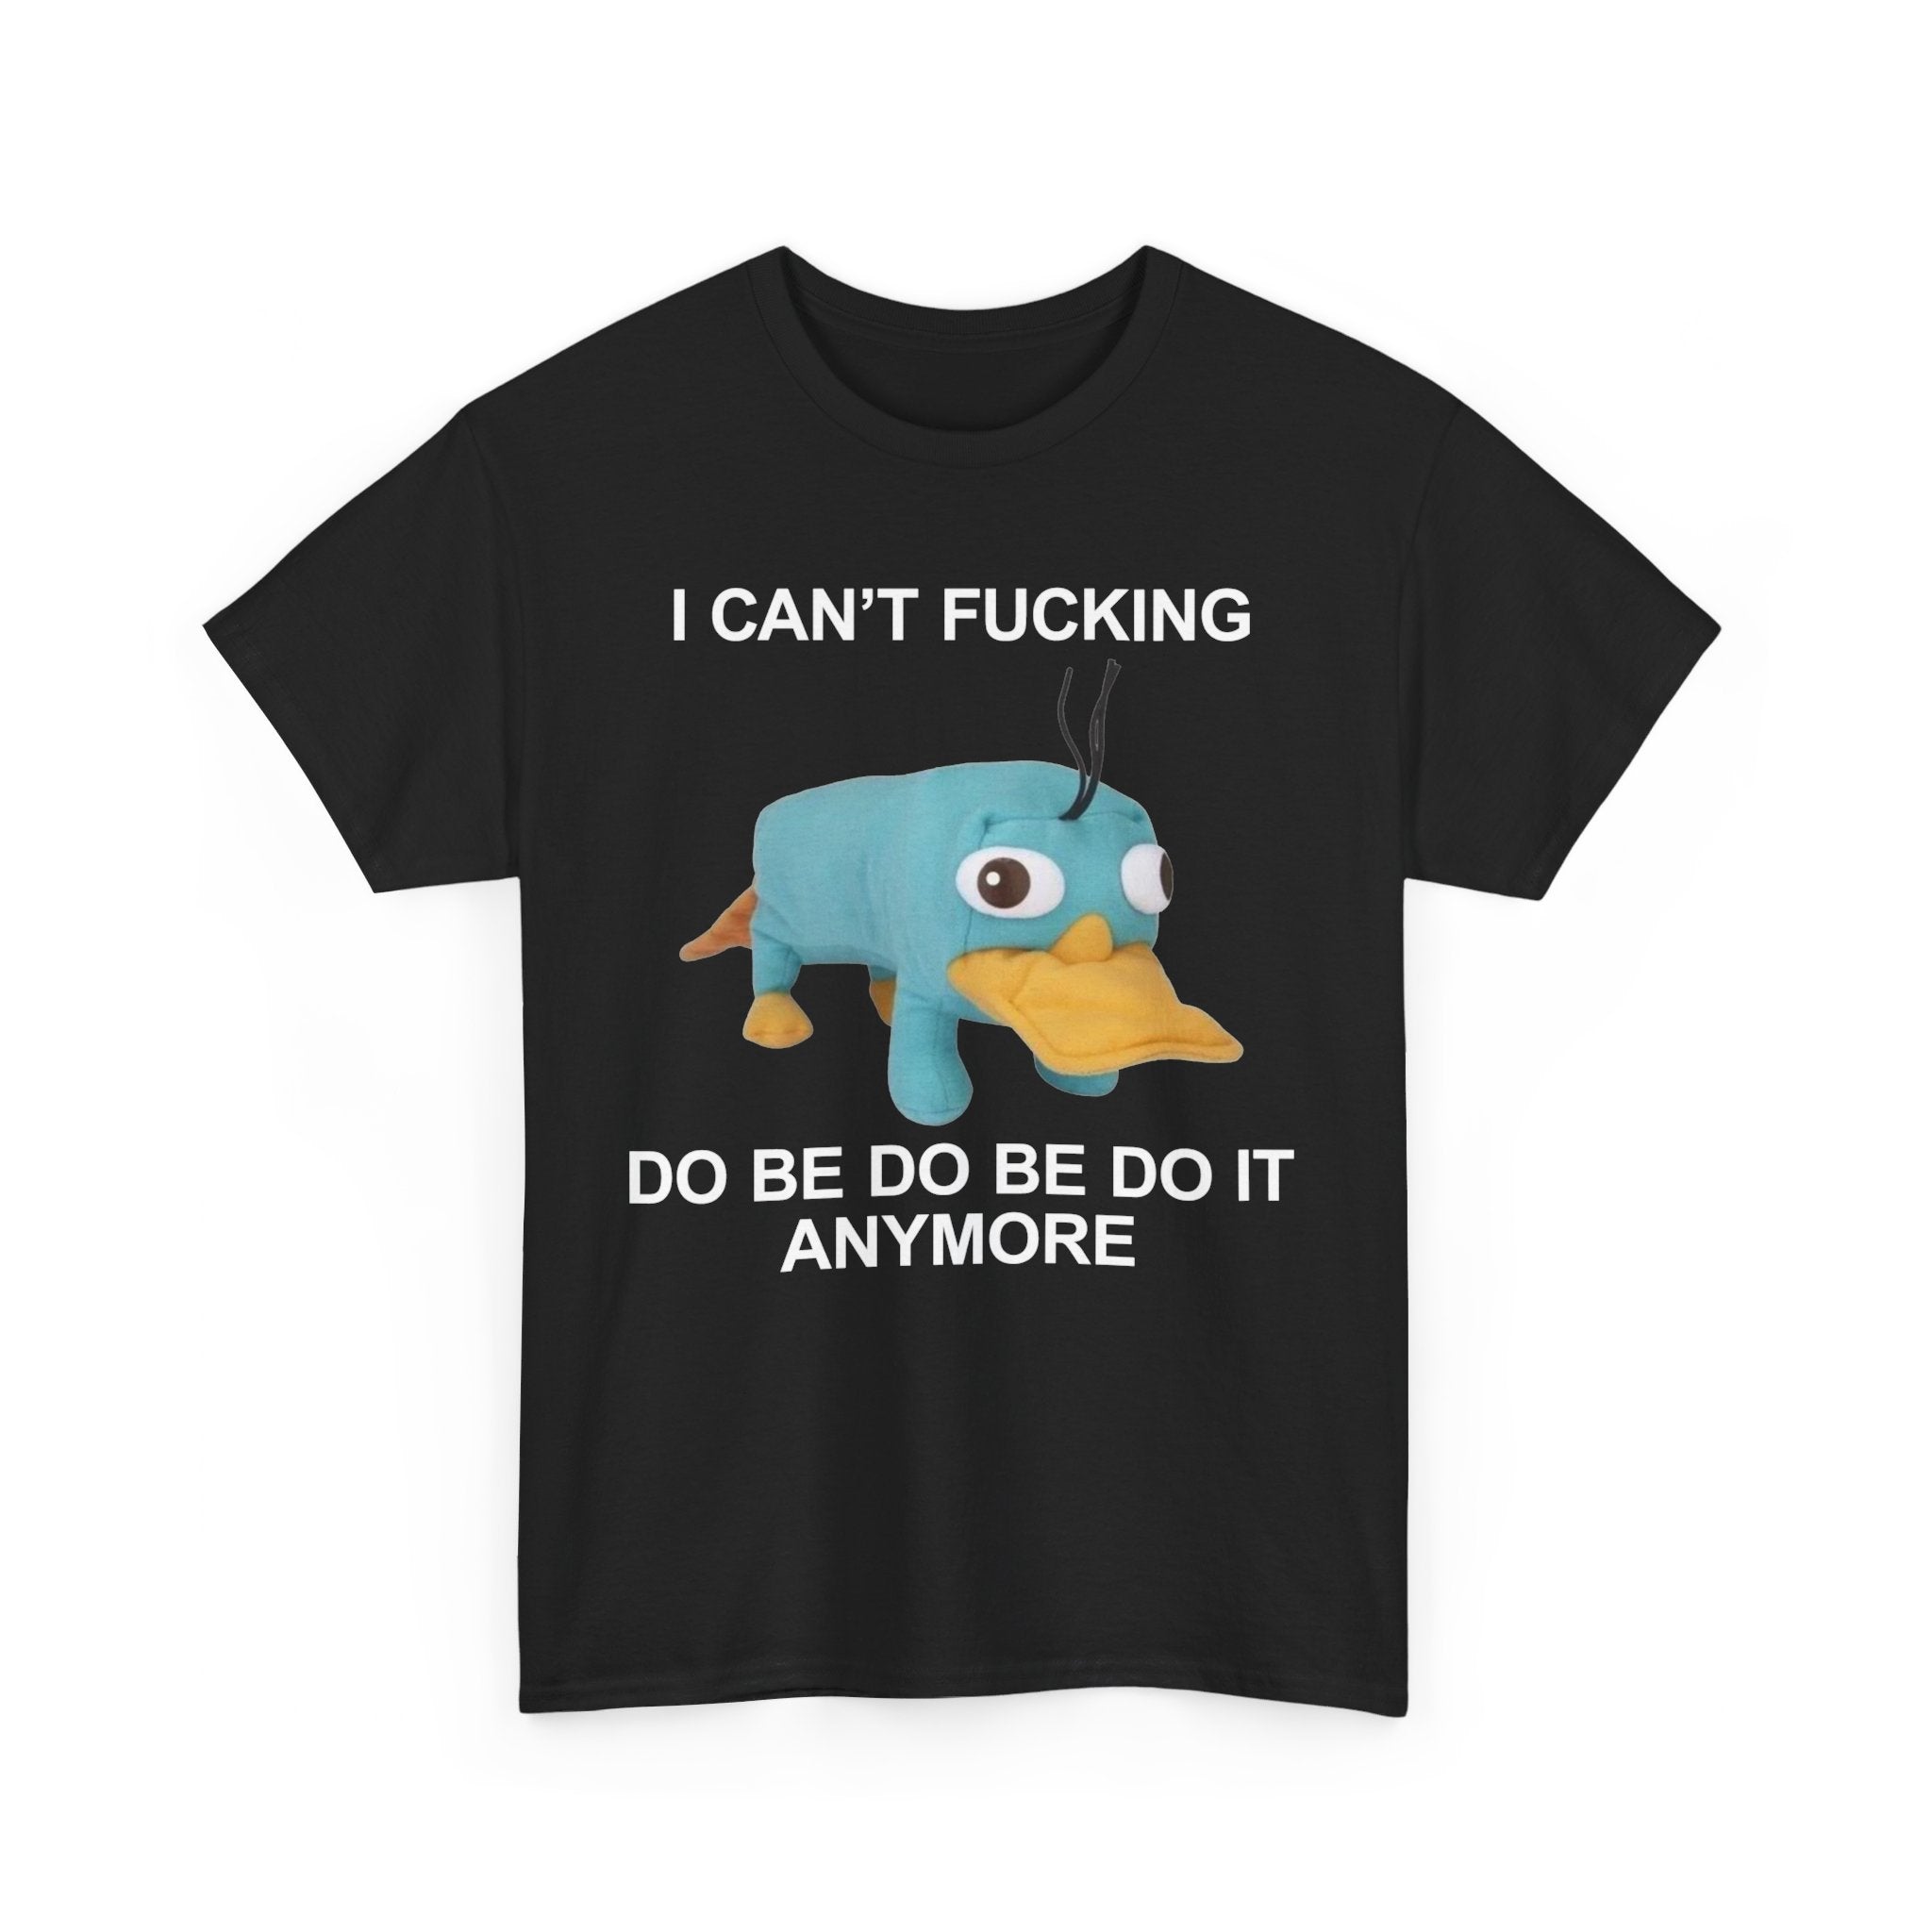 I CAN'T FUCKING DO BE DO BE DO IT ANYMORE T-SHIRT